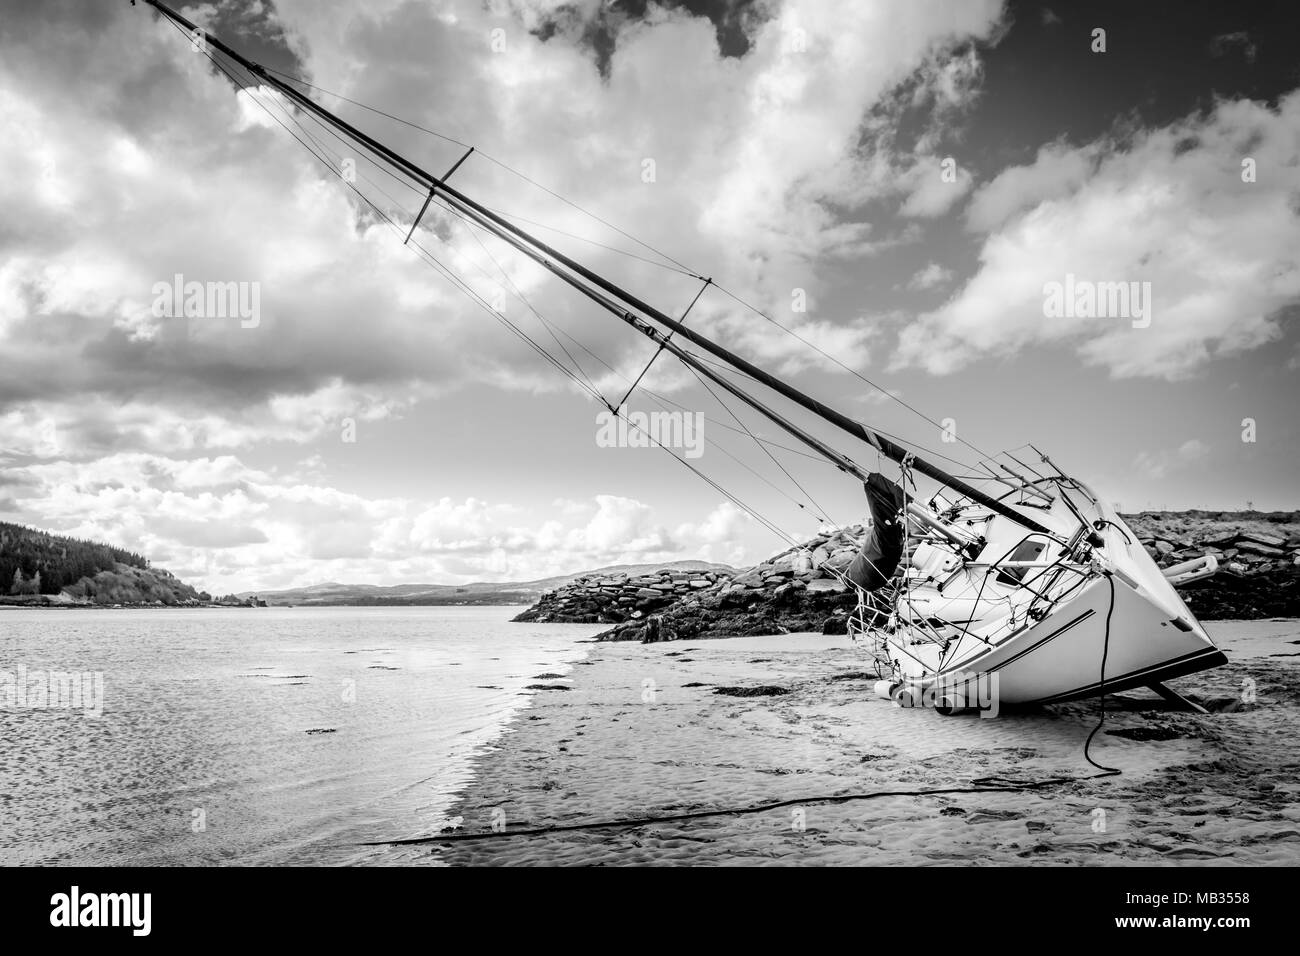 A Black and white photo of a sail boat out of water at low tide. Stock Photo